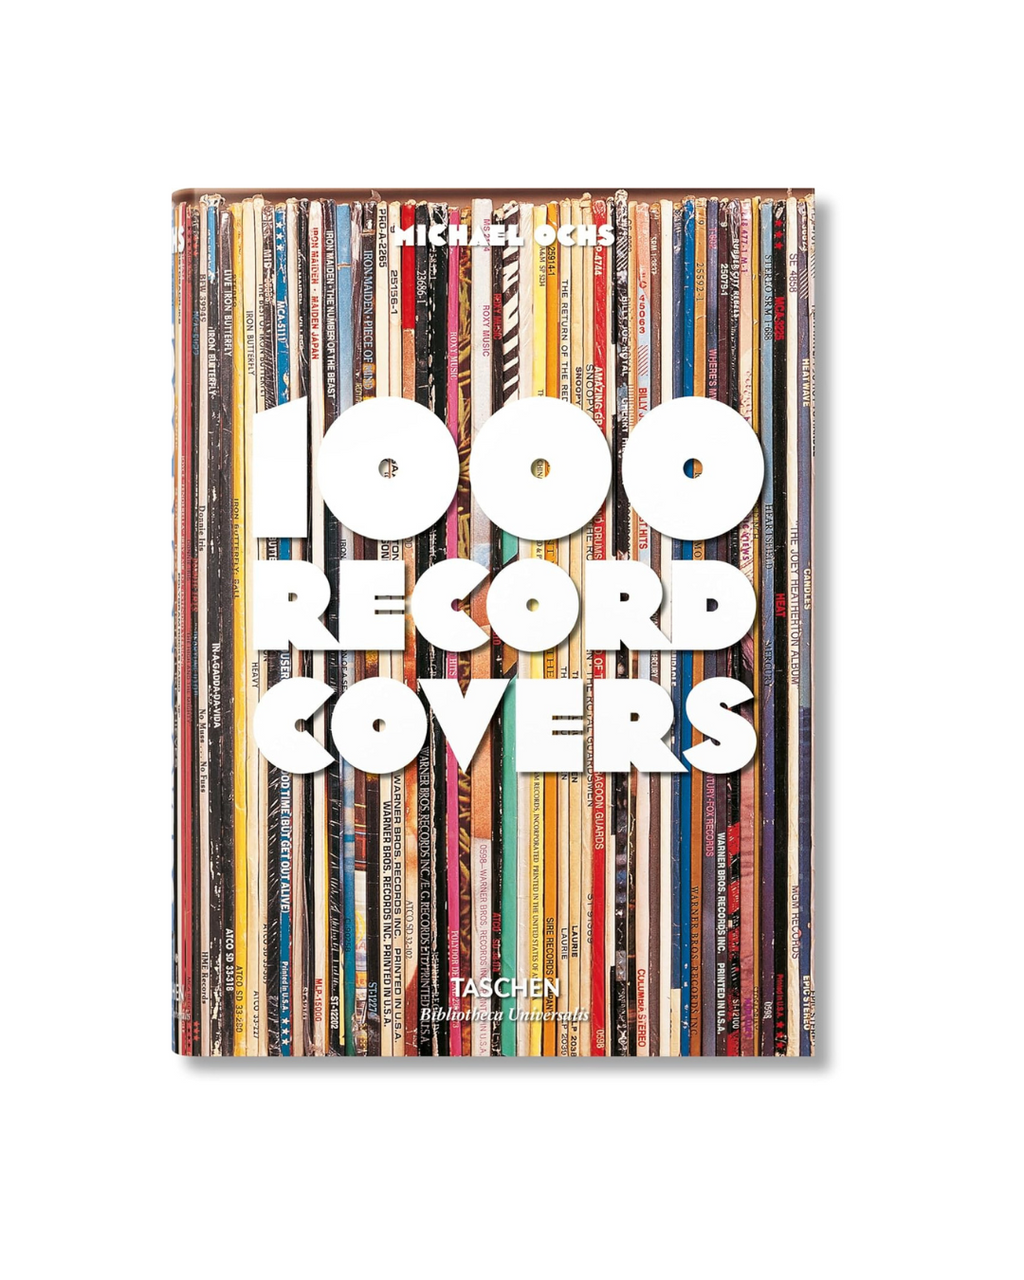 A book titled "1000 Record Covers" by Taschen, featuring a cover image depicting numerous vinyl record spines arranges vertically 